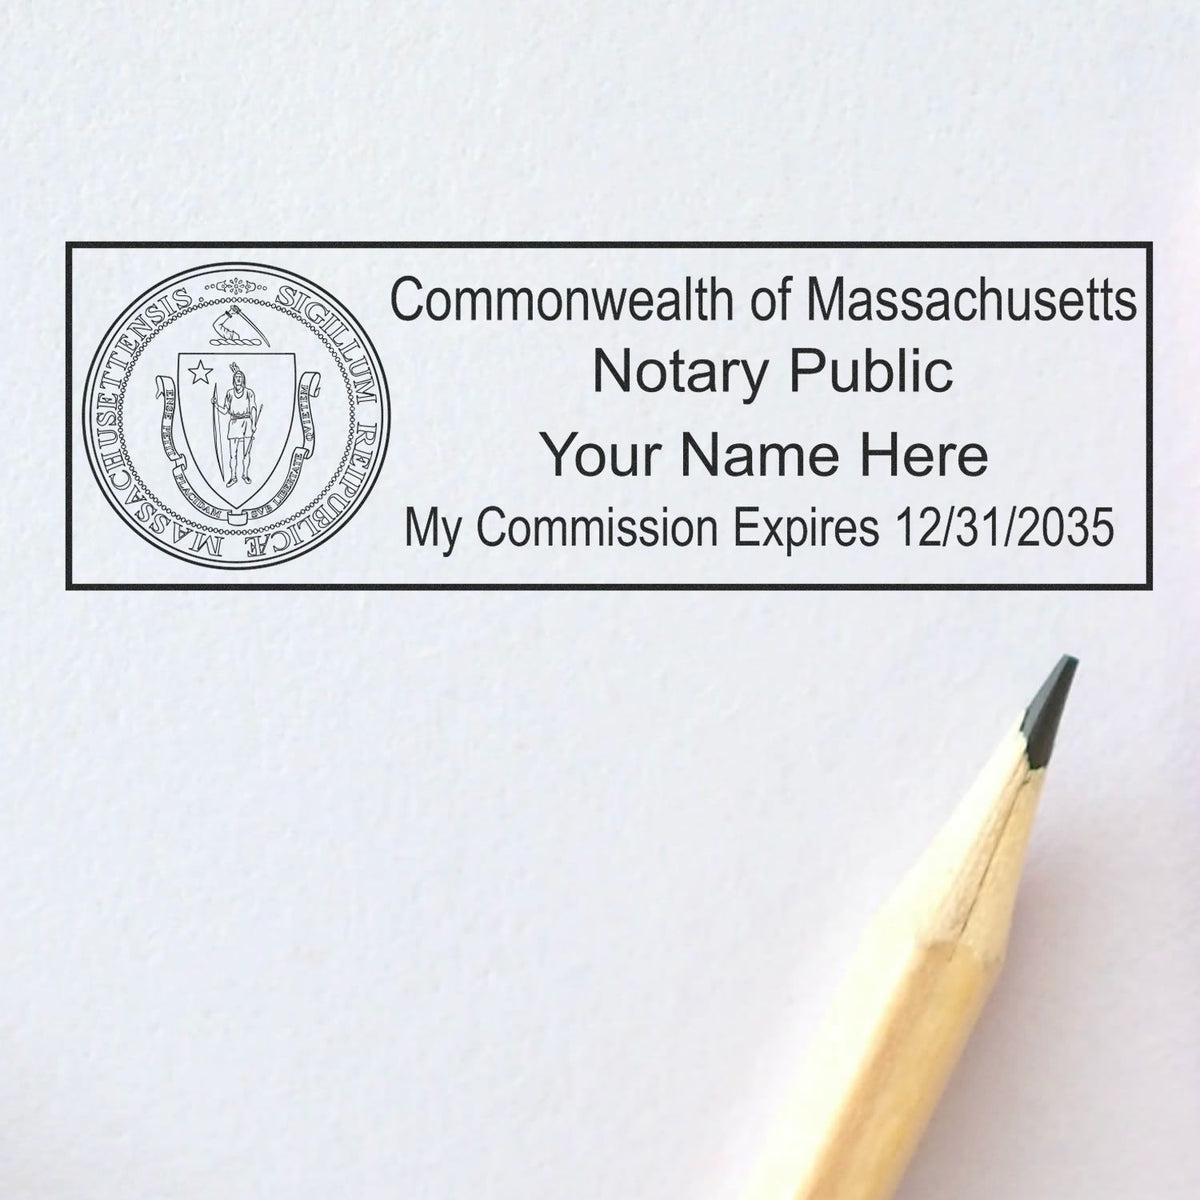 The Heavy-Duty Massachusetts Rectangular Notary Stamp stamp impression comes to life with a crisp, detailed photo on paper - showcasing true professional quality.